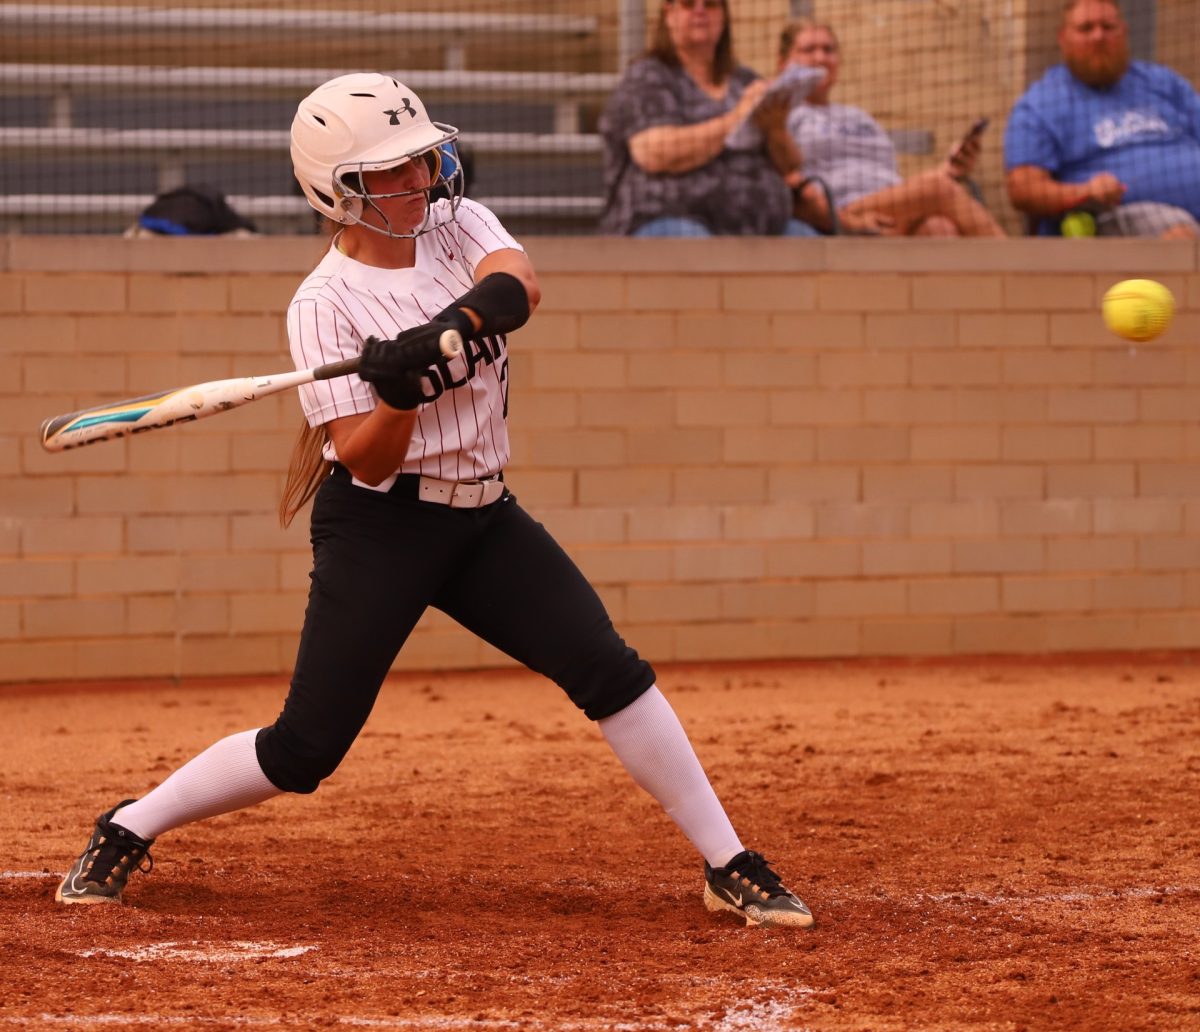 Harlan+County+catcher+Jade+Burton+collected+a+pair+of+hits+and+two+RBI+in+the+Lady+Bears+10-0+win+over+Bell+County+on+Tuesday.